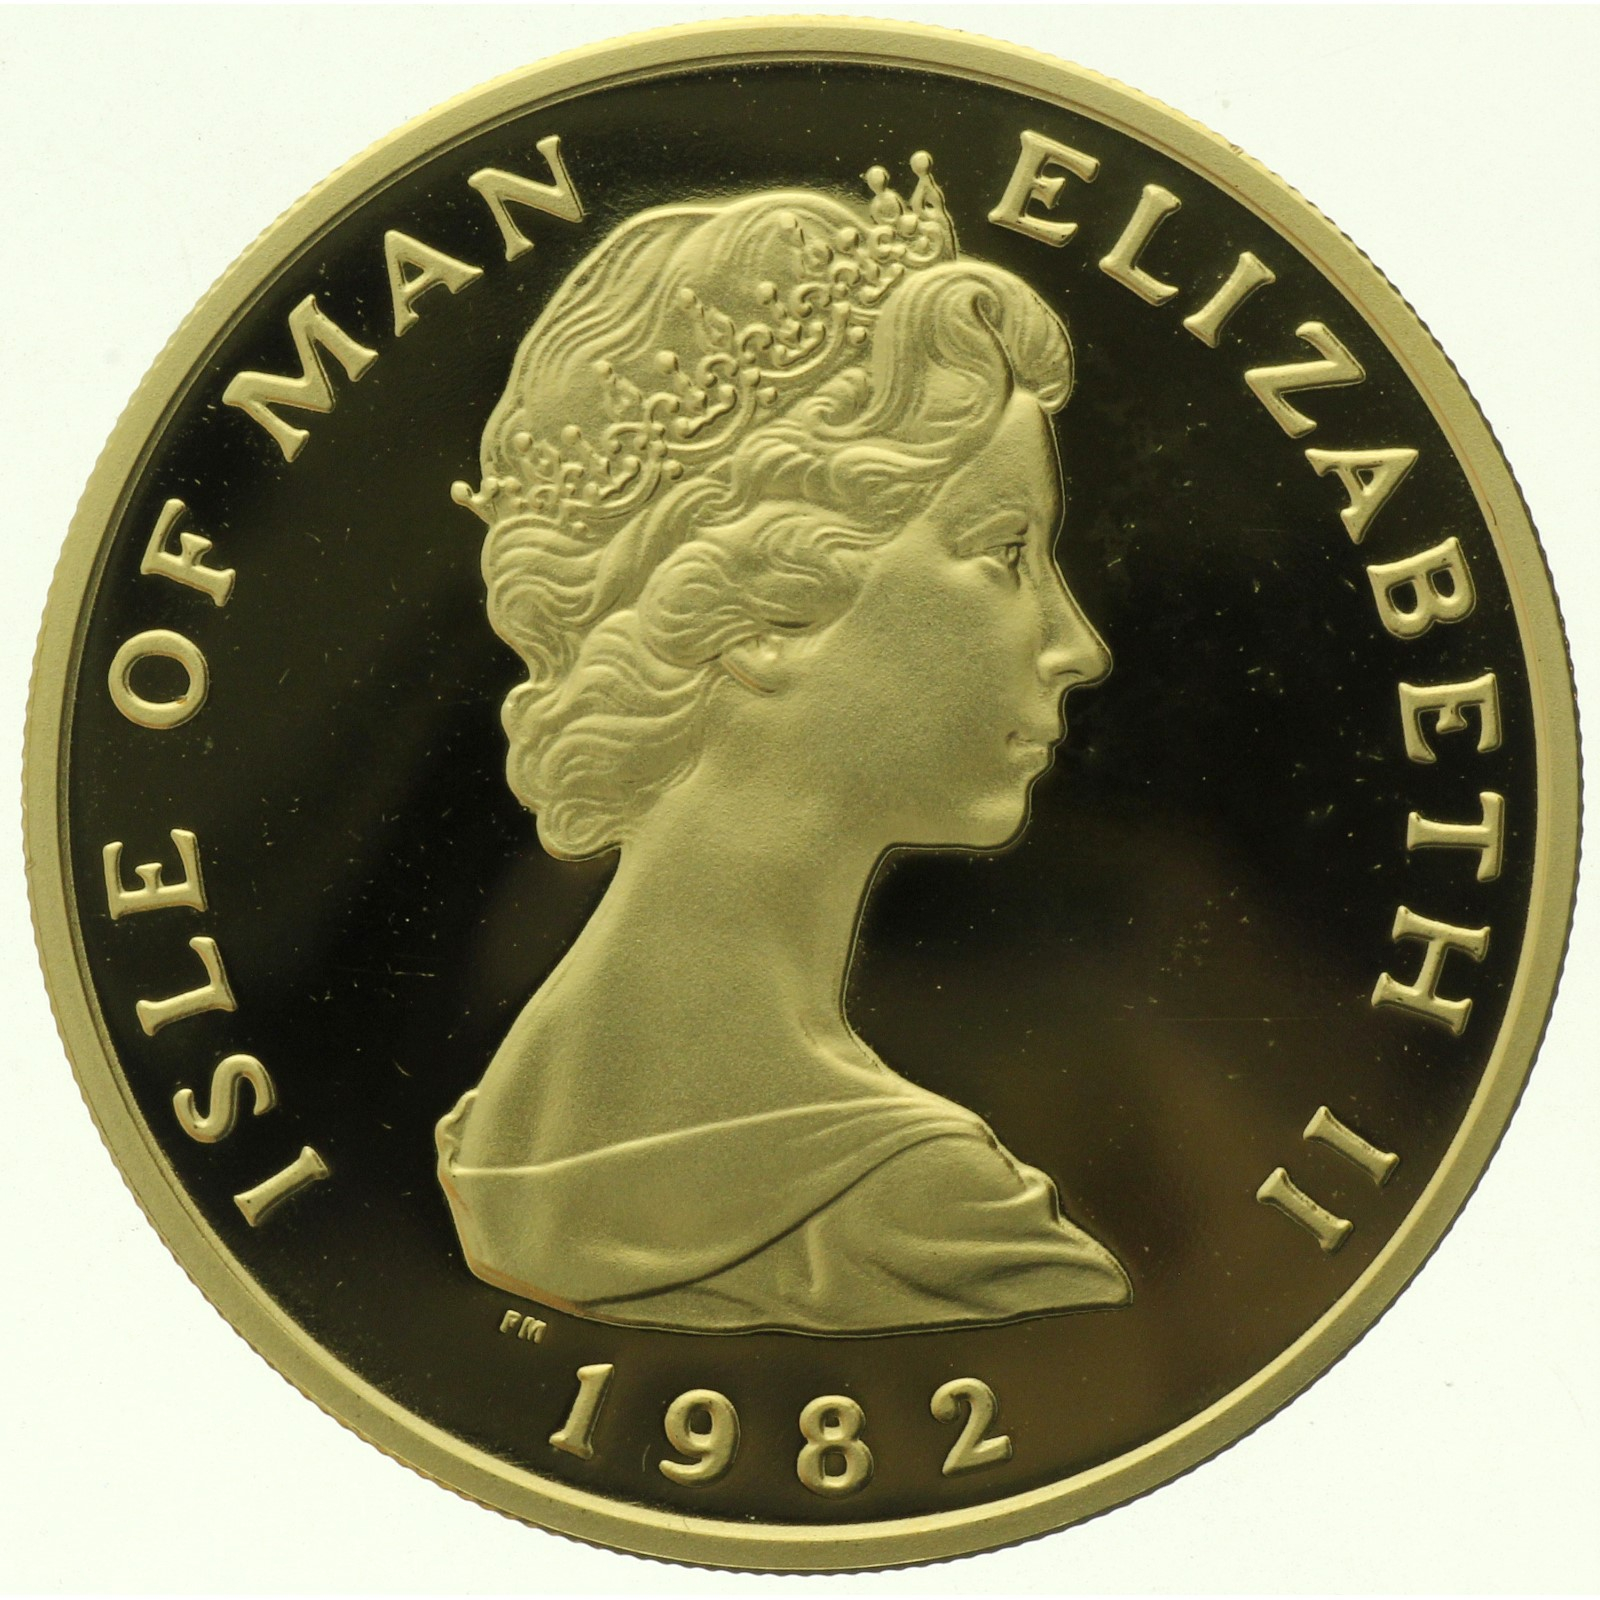 Isle of Man - 10 pence - 1982 - Gold issue 